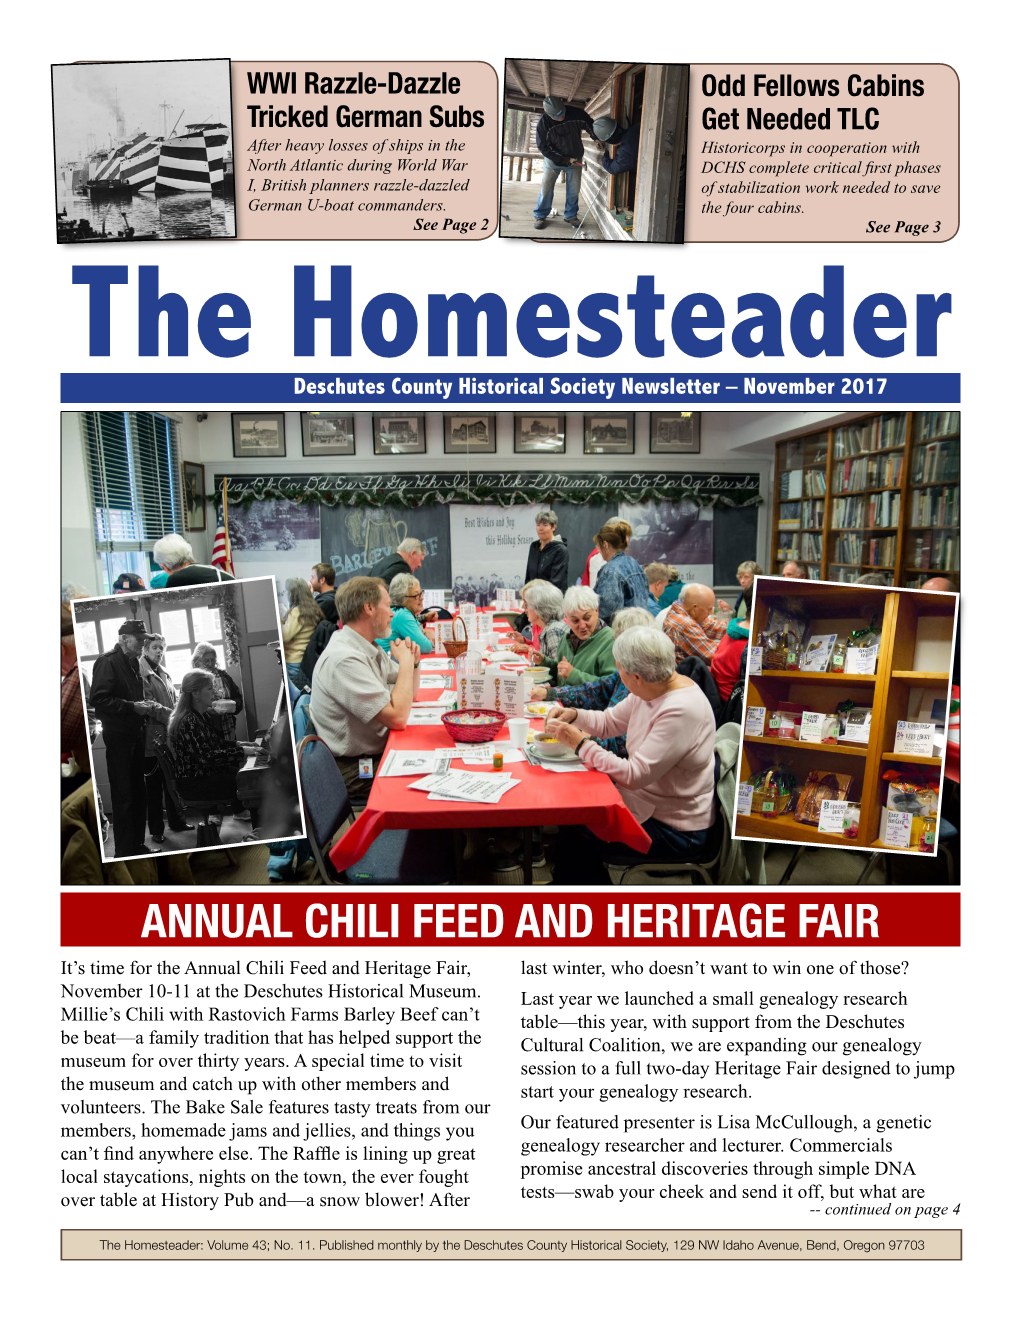 Annual Chili Feed and Heritage Fair